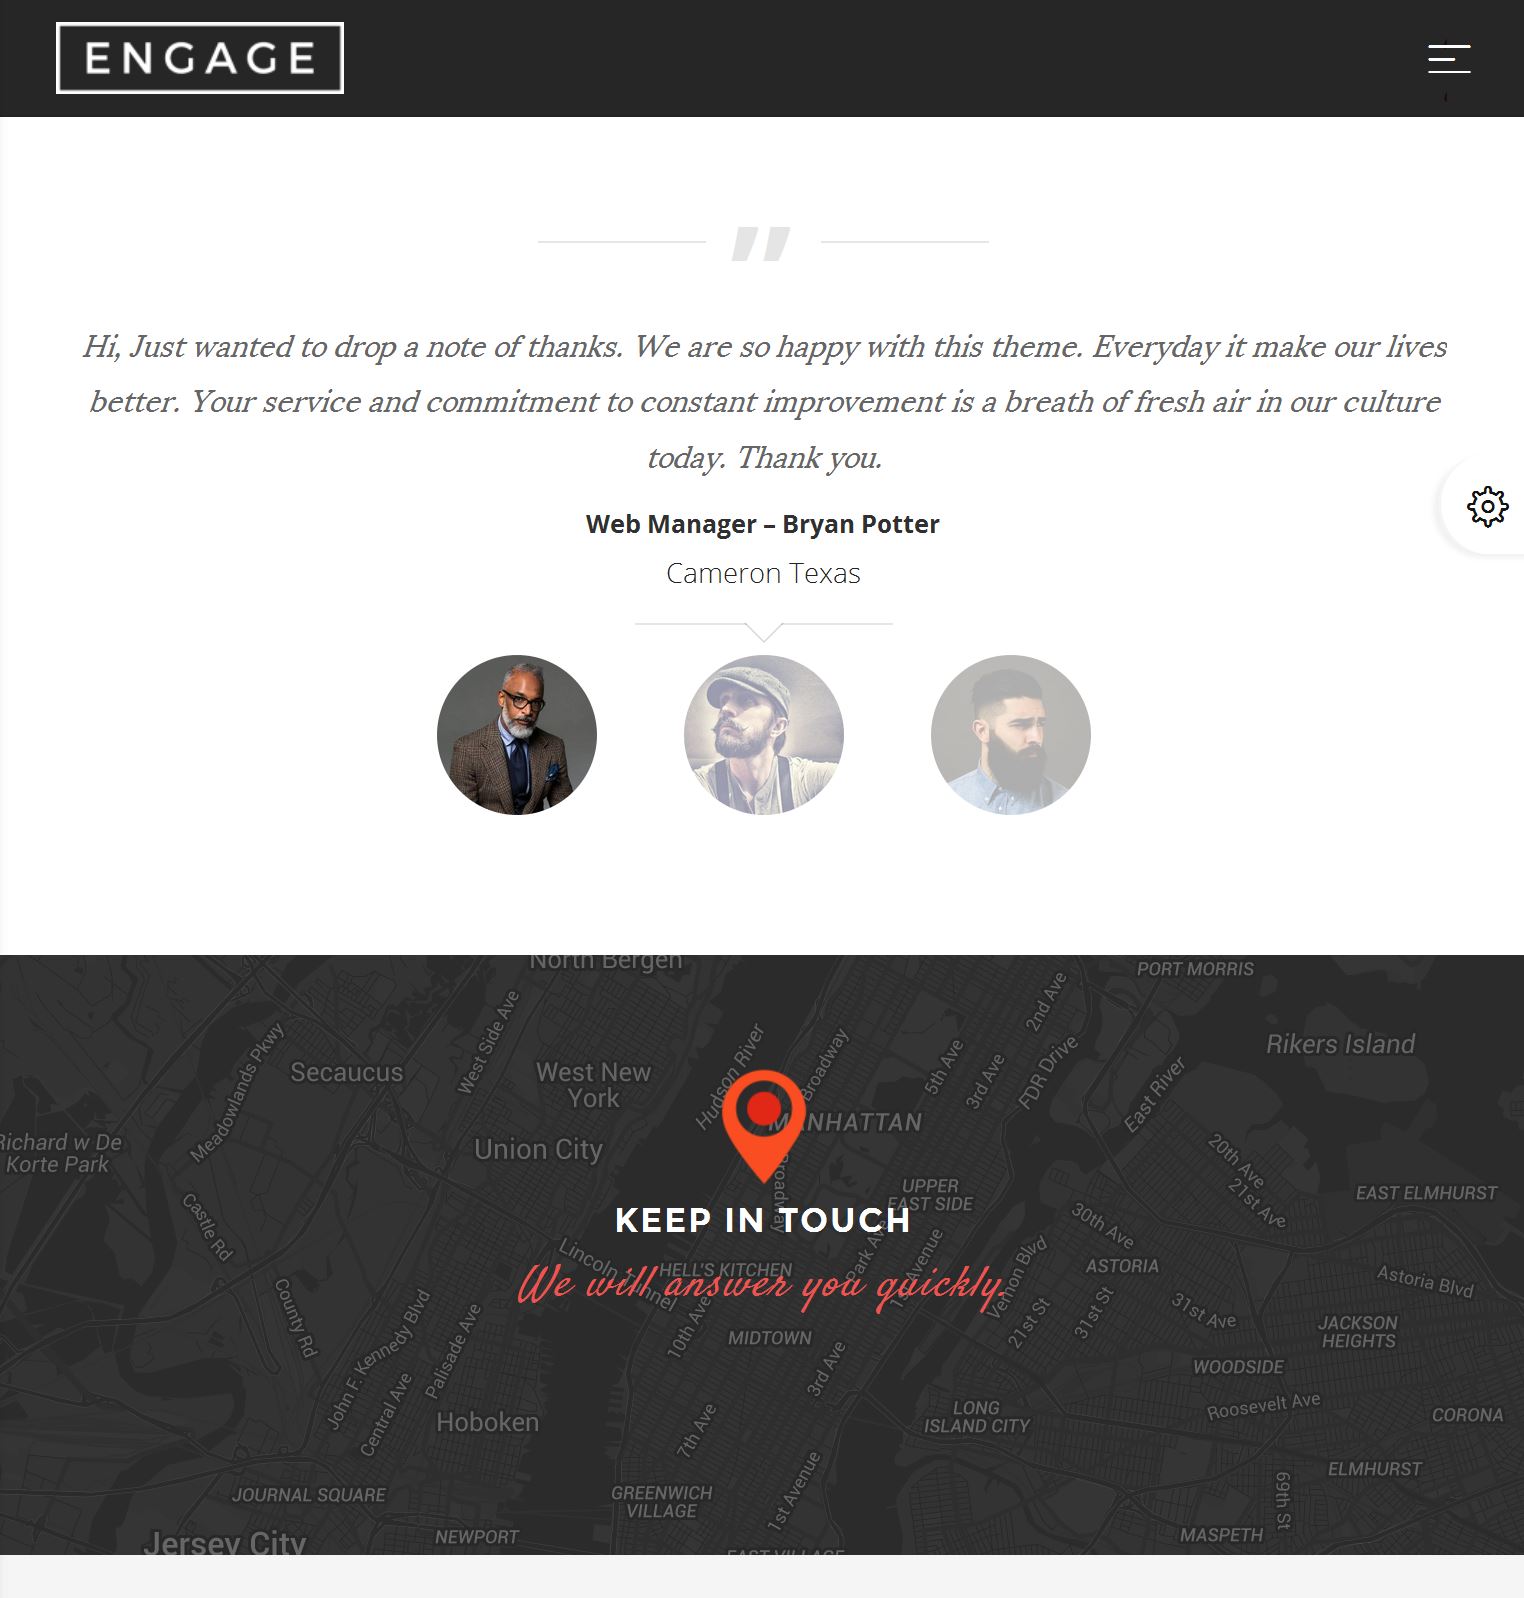 Carousel Bootstrap Template